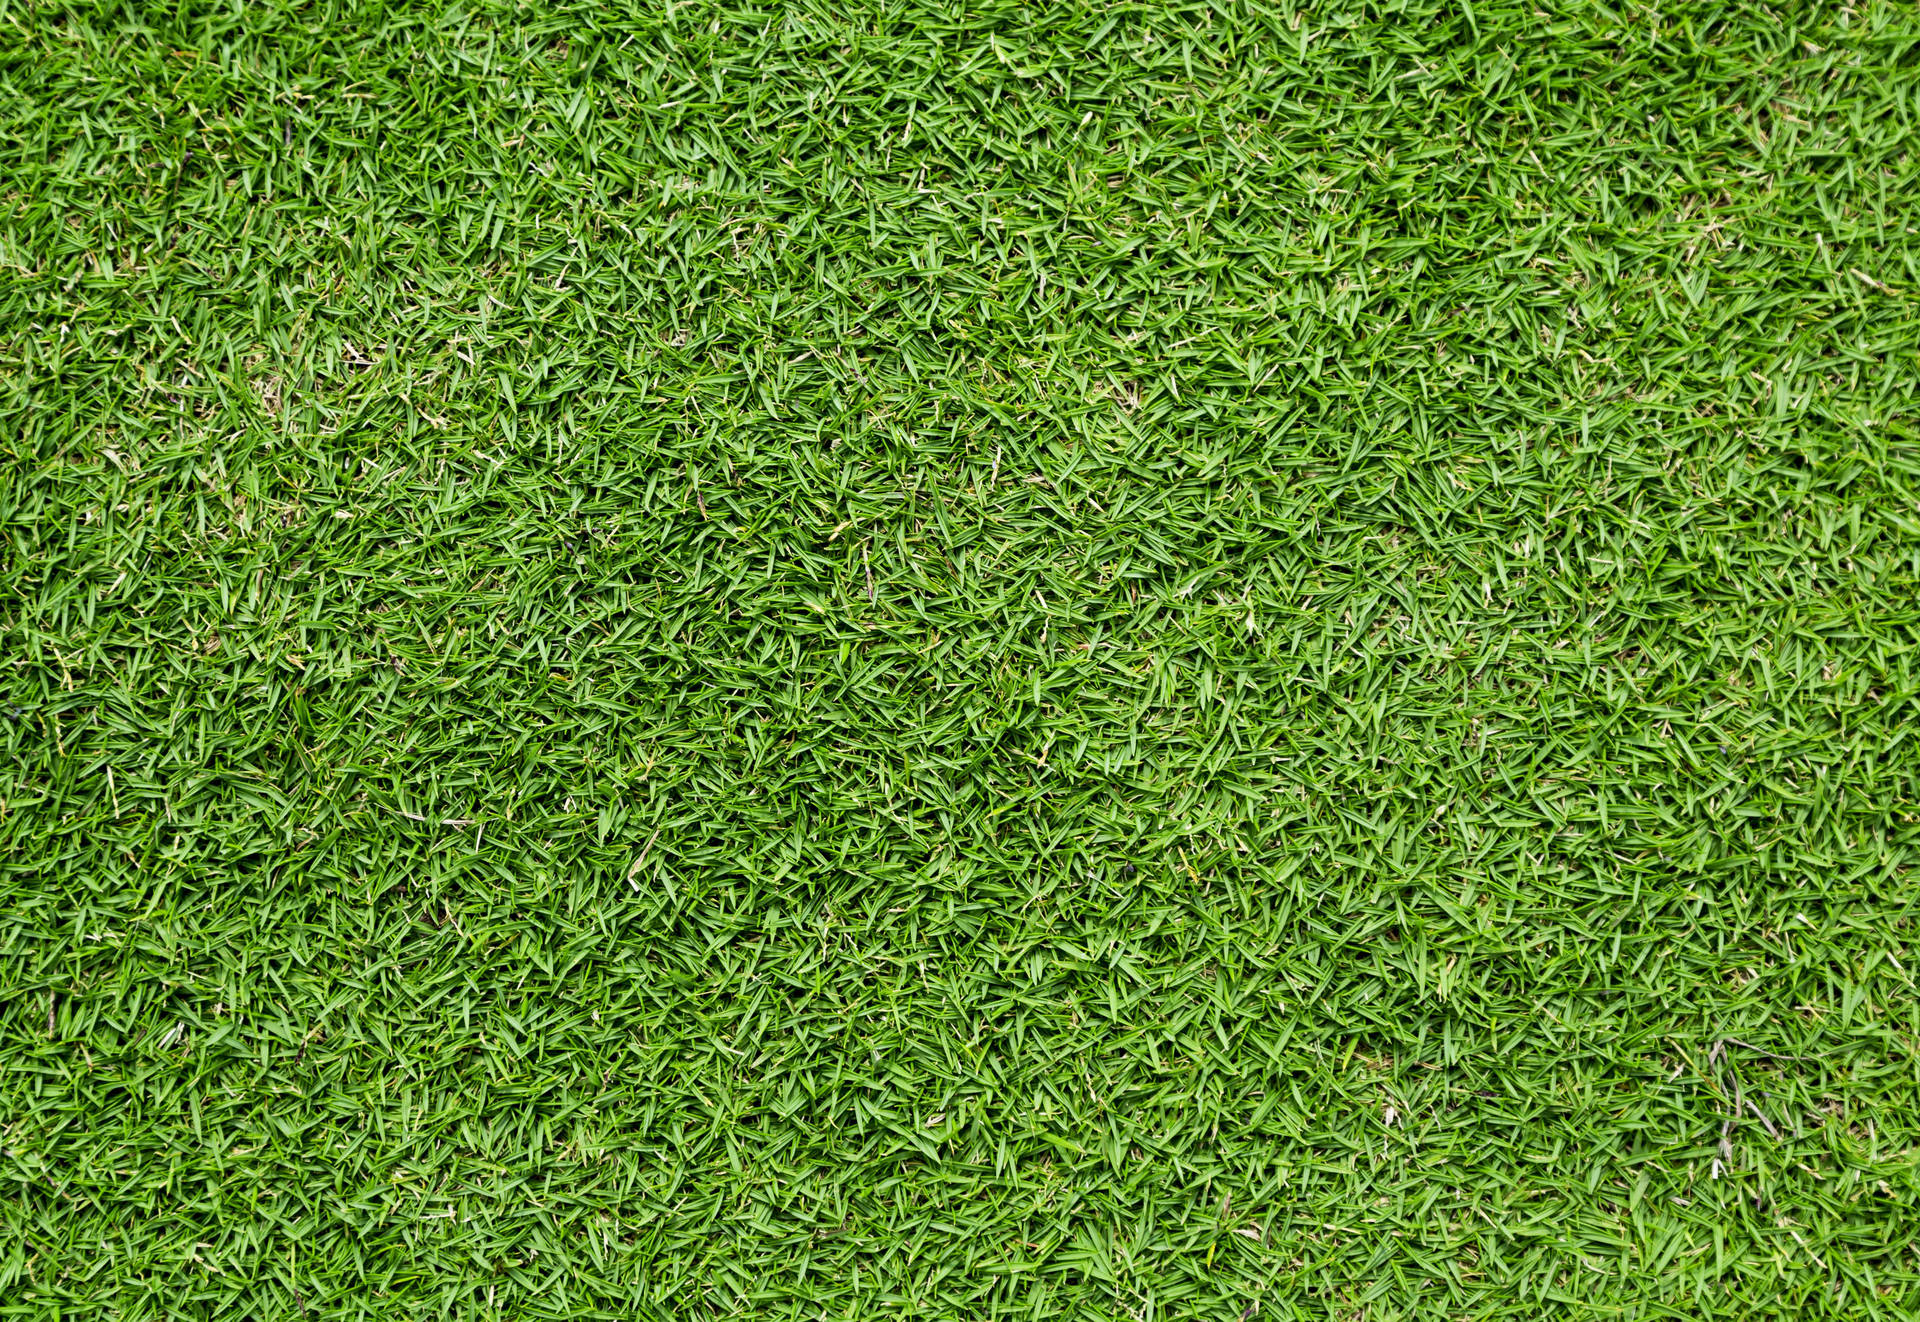 4672X3216 Grass Wallpaper and Background